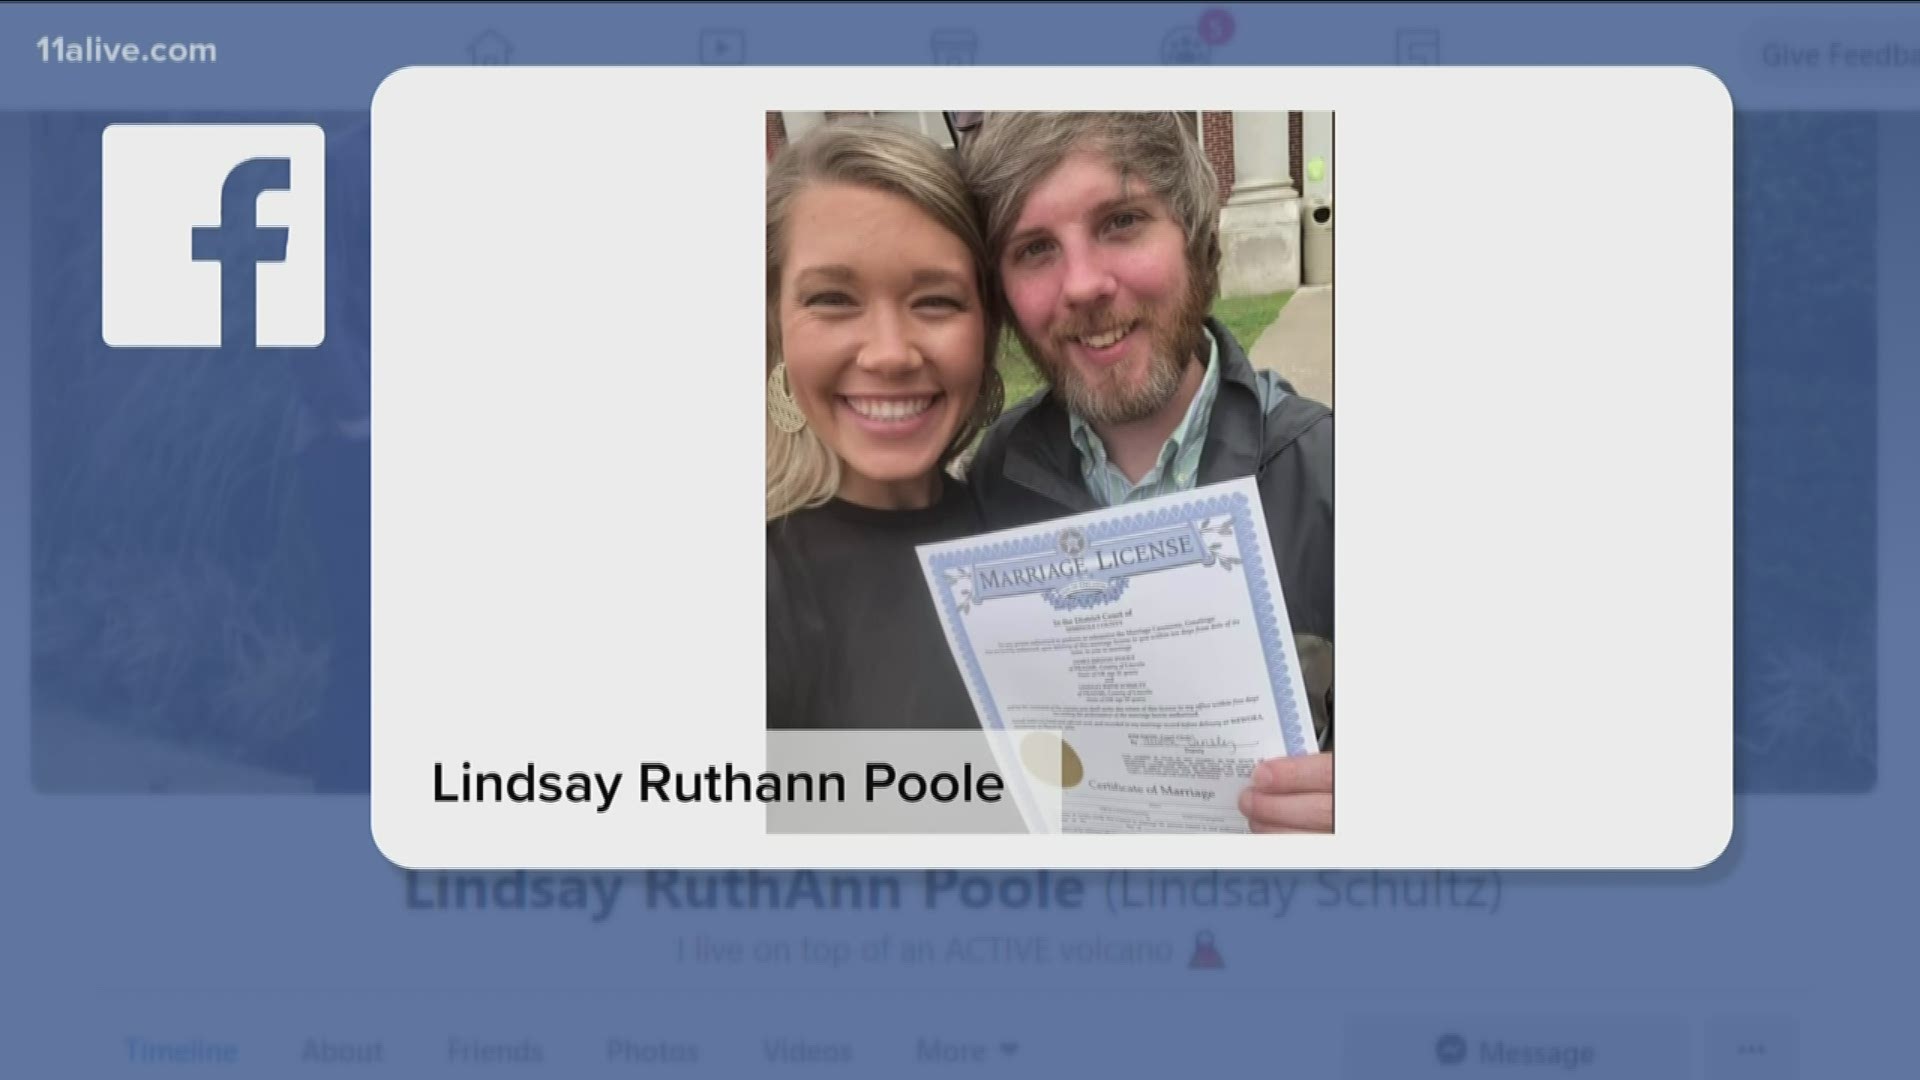 The couple was supposed to be married in April but canceled and put their wedding on Facebook Live amid social distancing concerns.